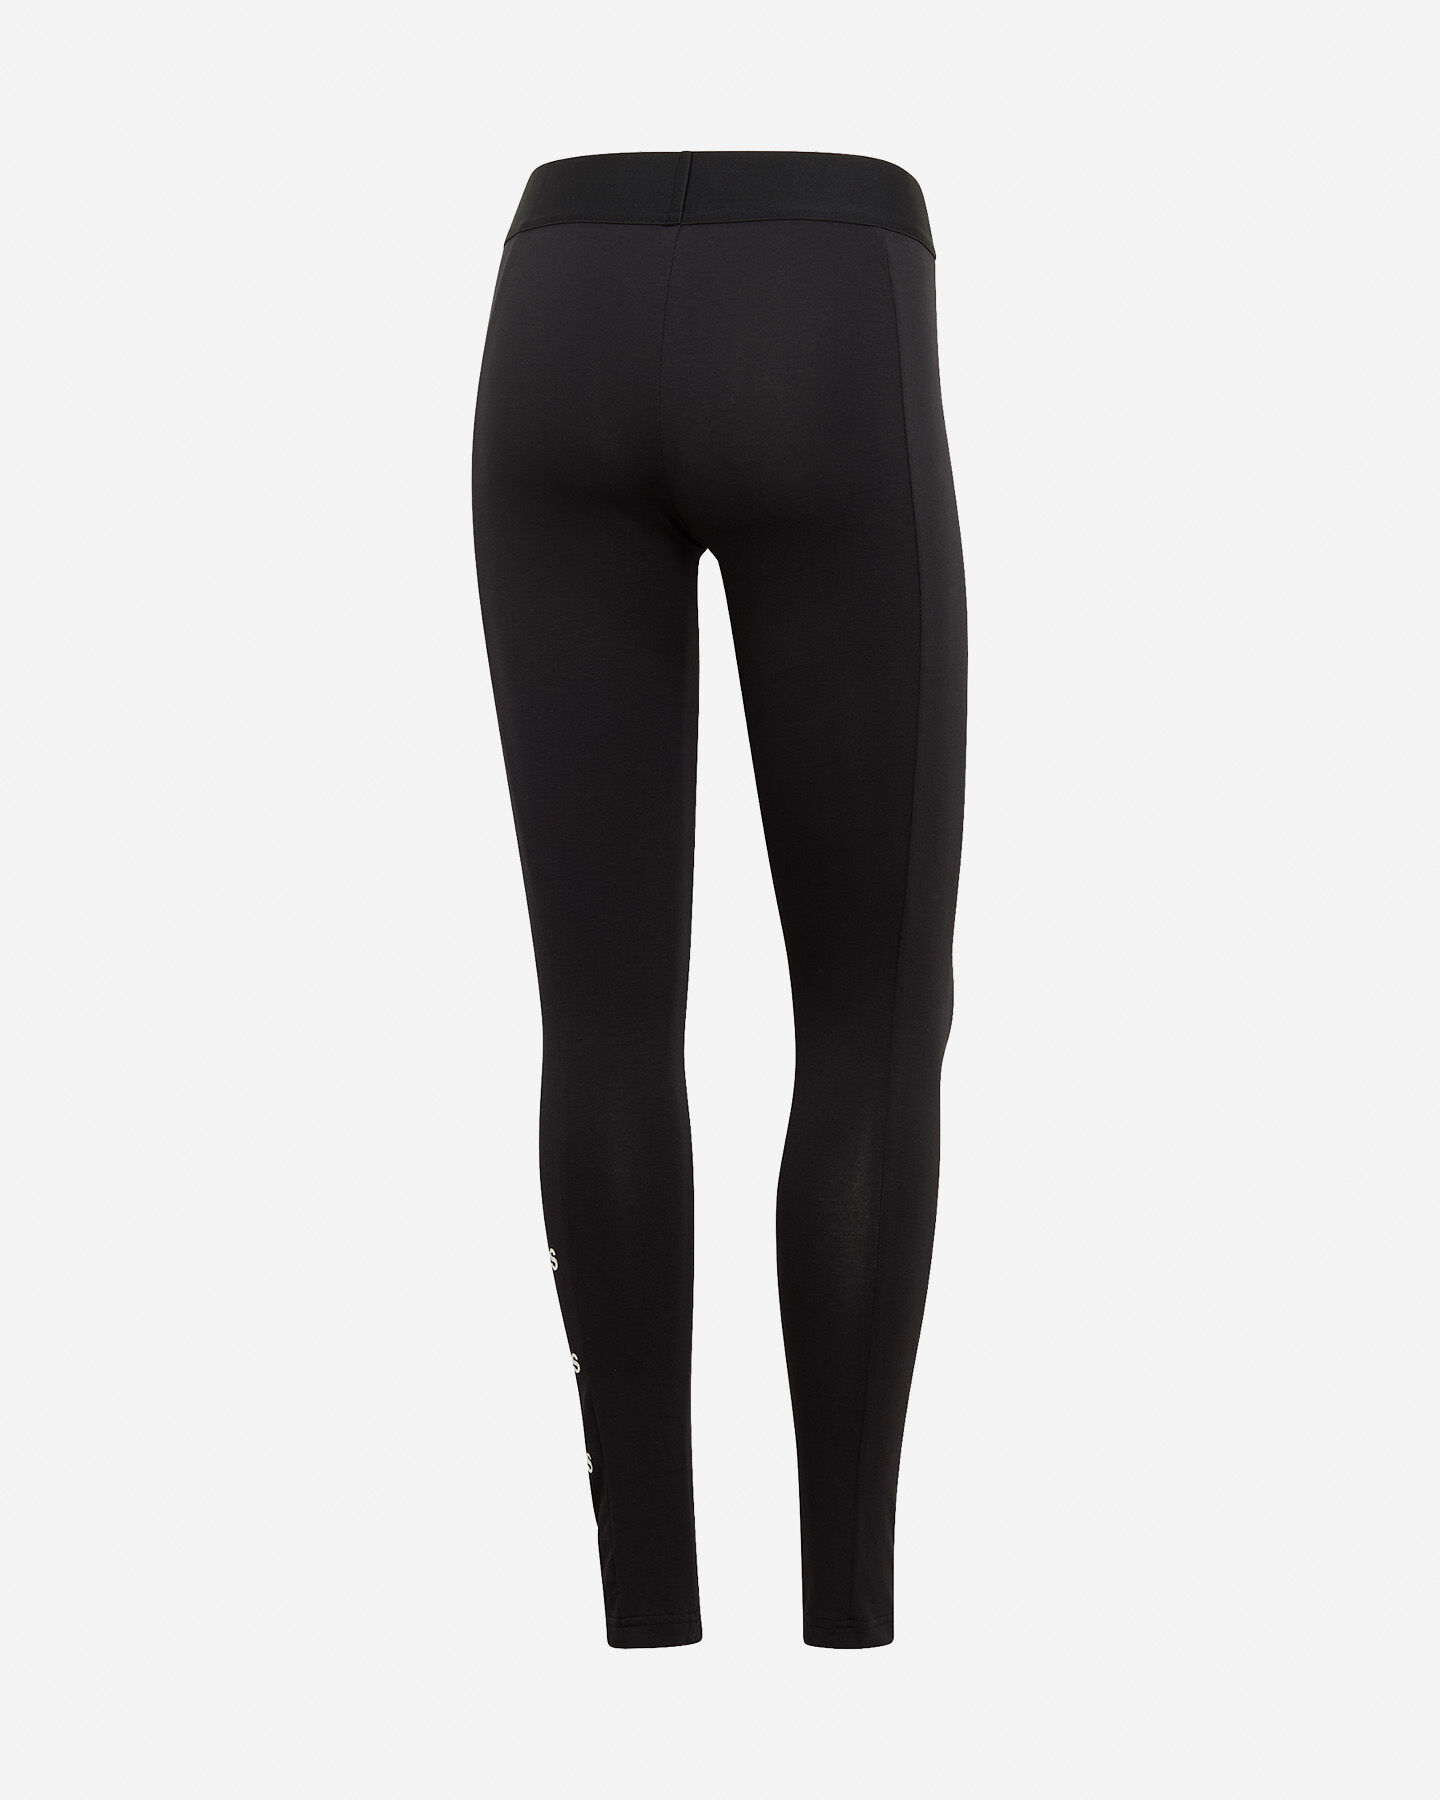  Leggings ADIDAS MUST HAVES STACKED LOGO W S5153933|UNI|XS scatto 1